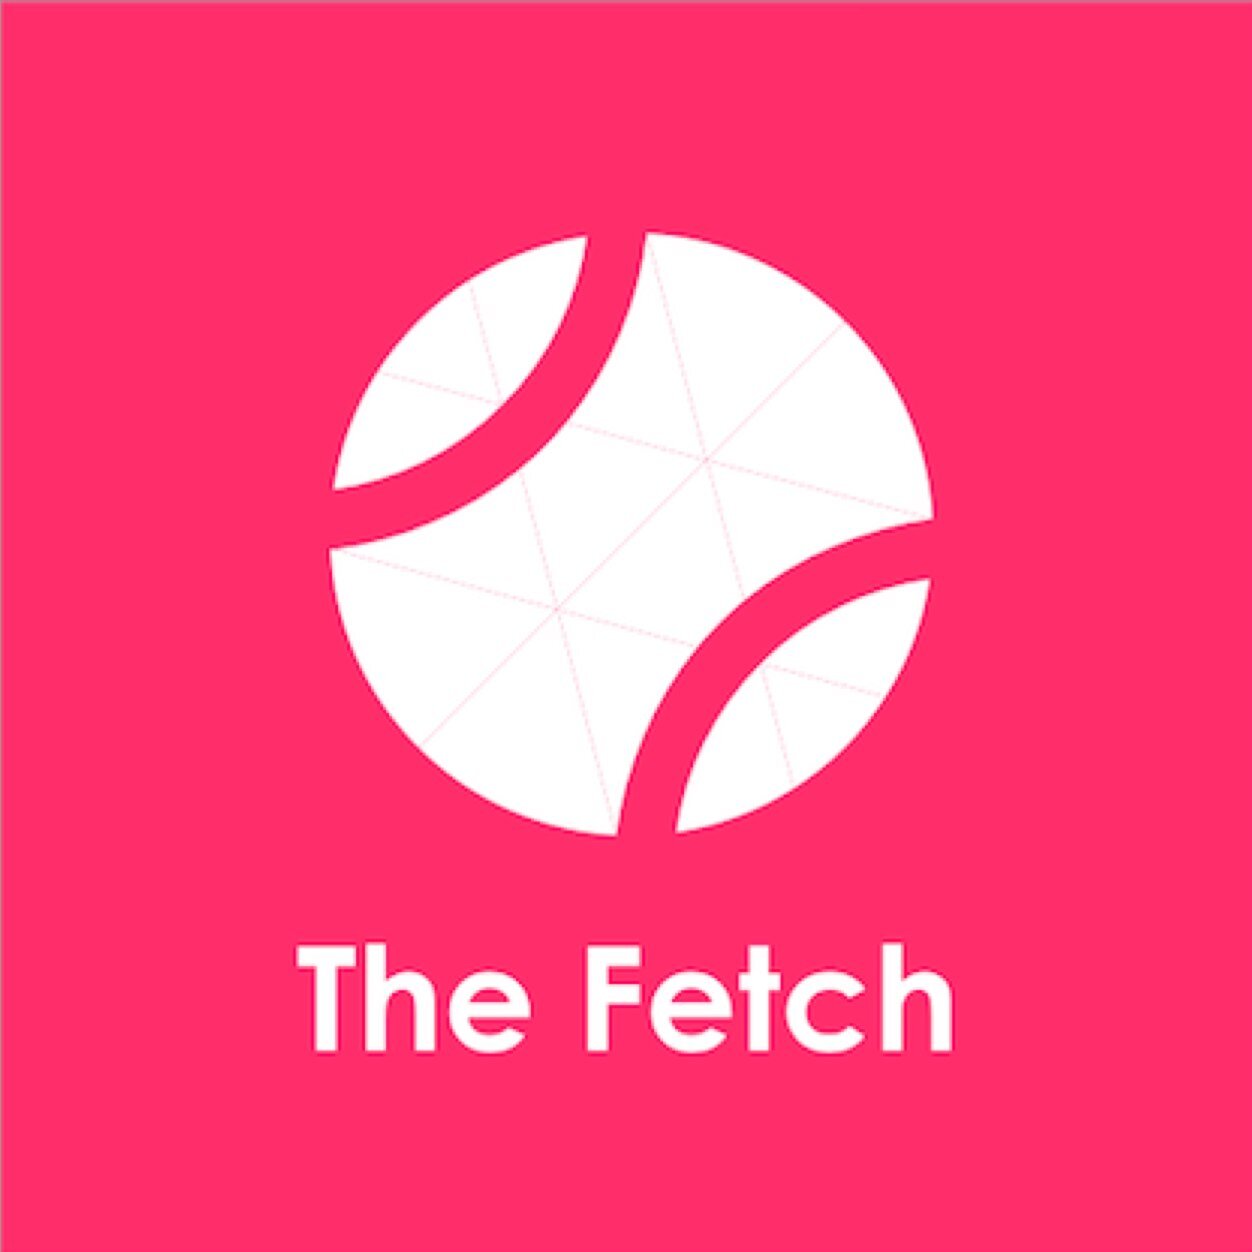 The Fetch is a guide to the best remote events, online courses, virtual conferences, webinars, bootcamps, workshops, livestreams, and more. Follow @thefetch. 💯